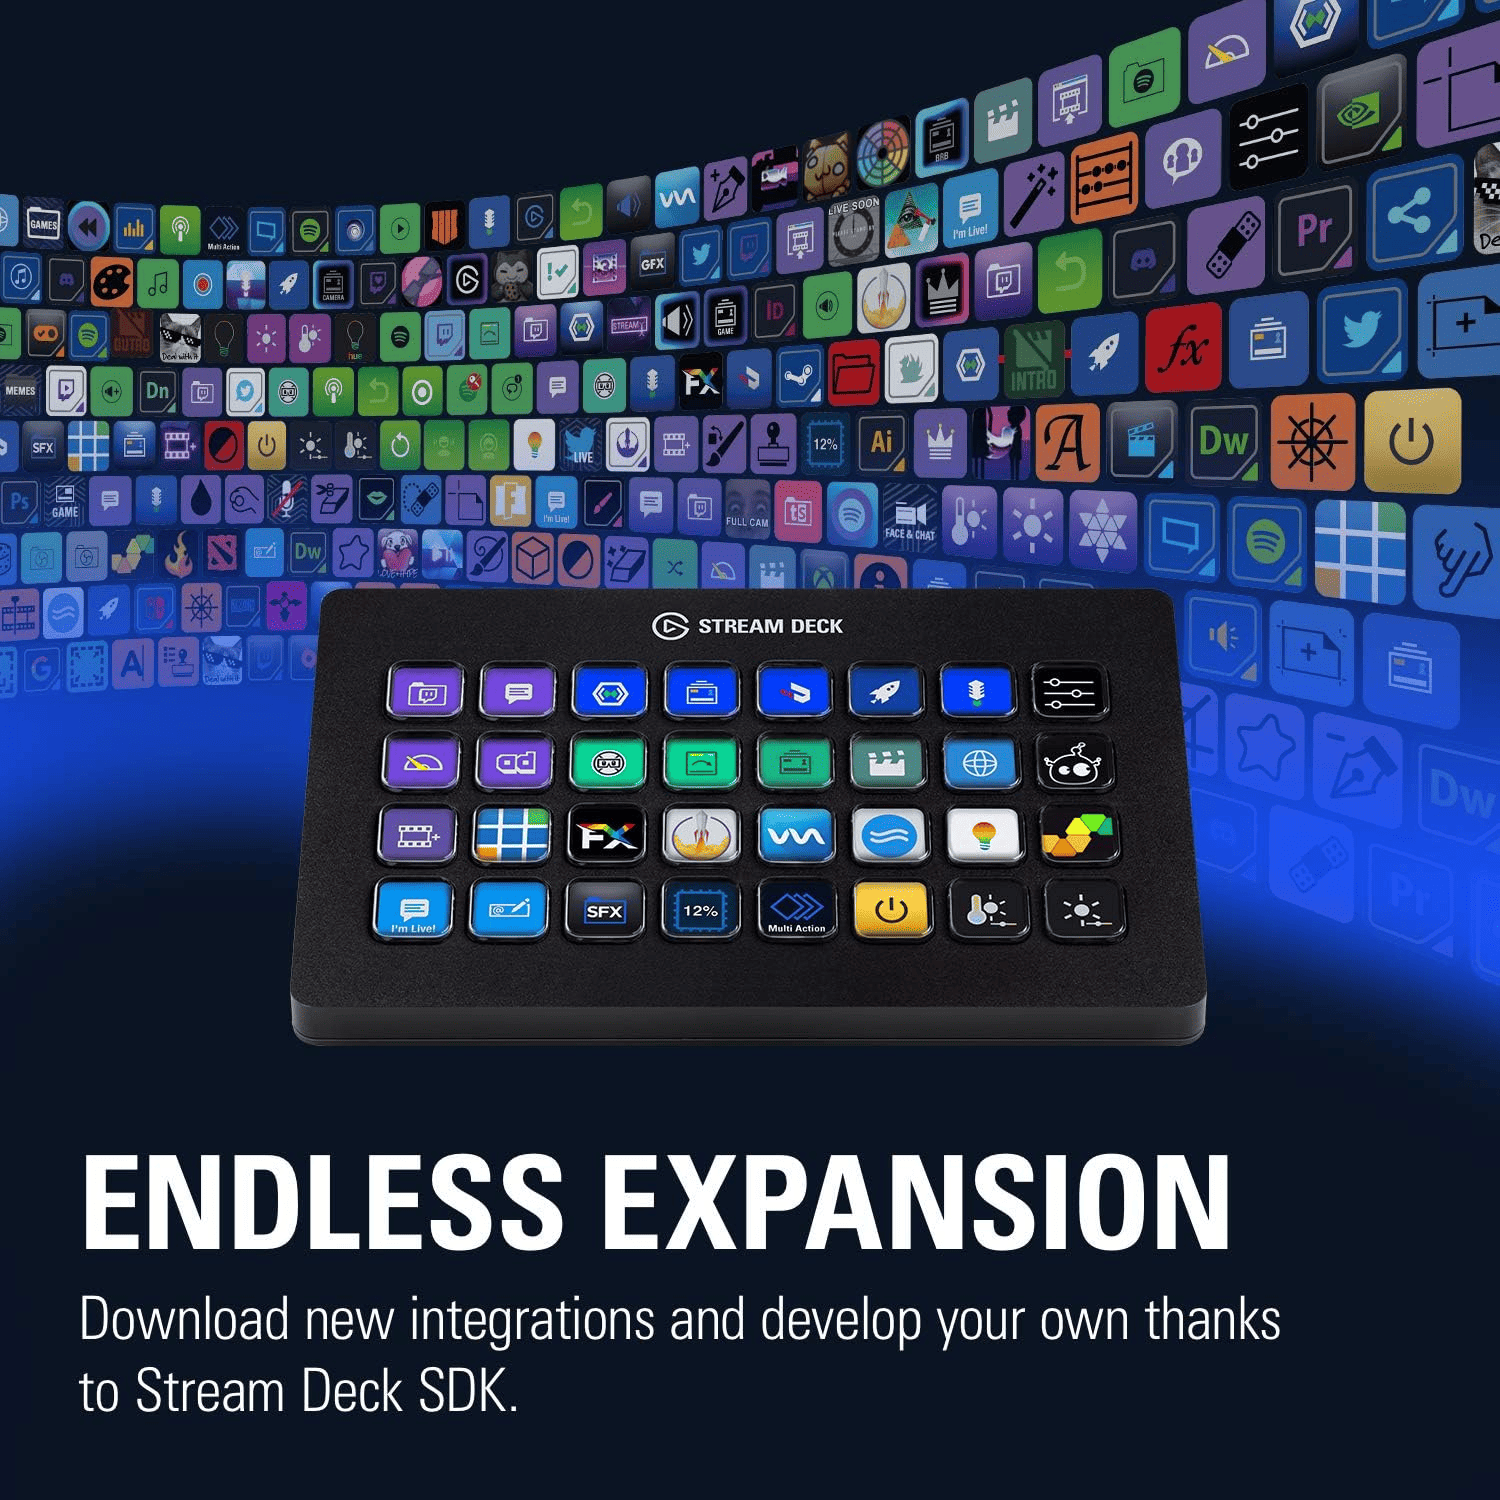 The Stream Deck's integrations allow Admins to quickly use the device on a multitude of apps and computer accessories.